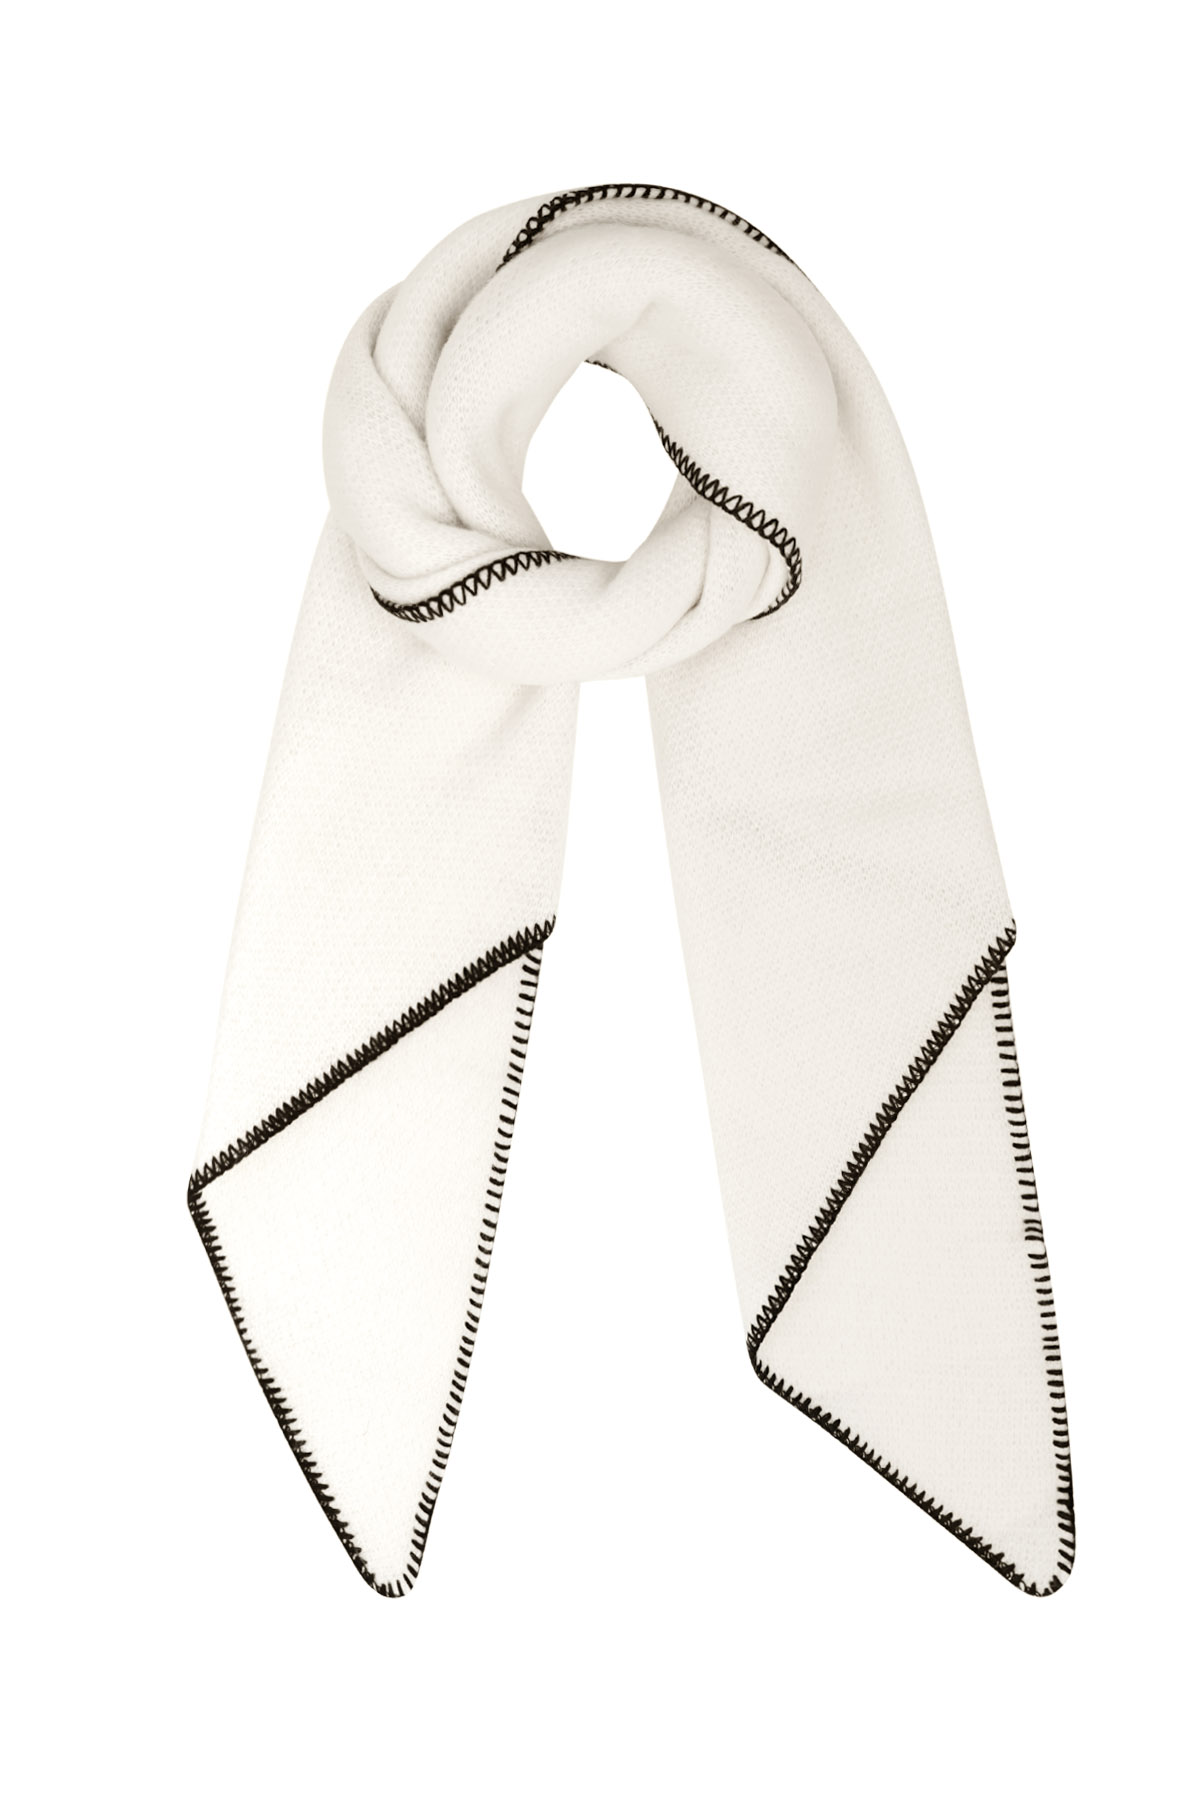 Winter scarf single-colored with black stitching - white